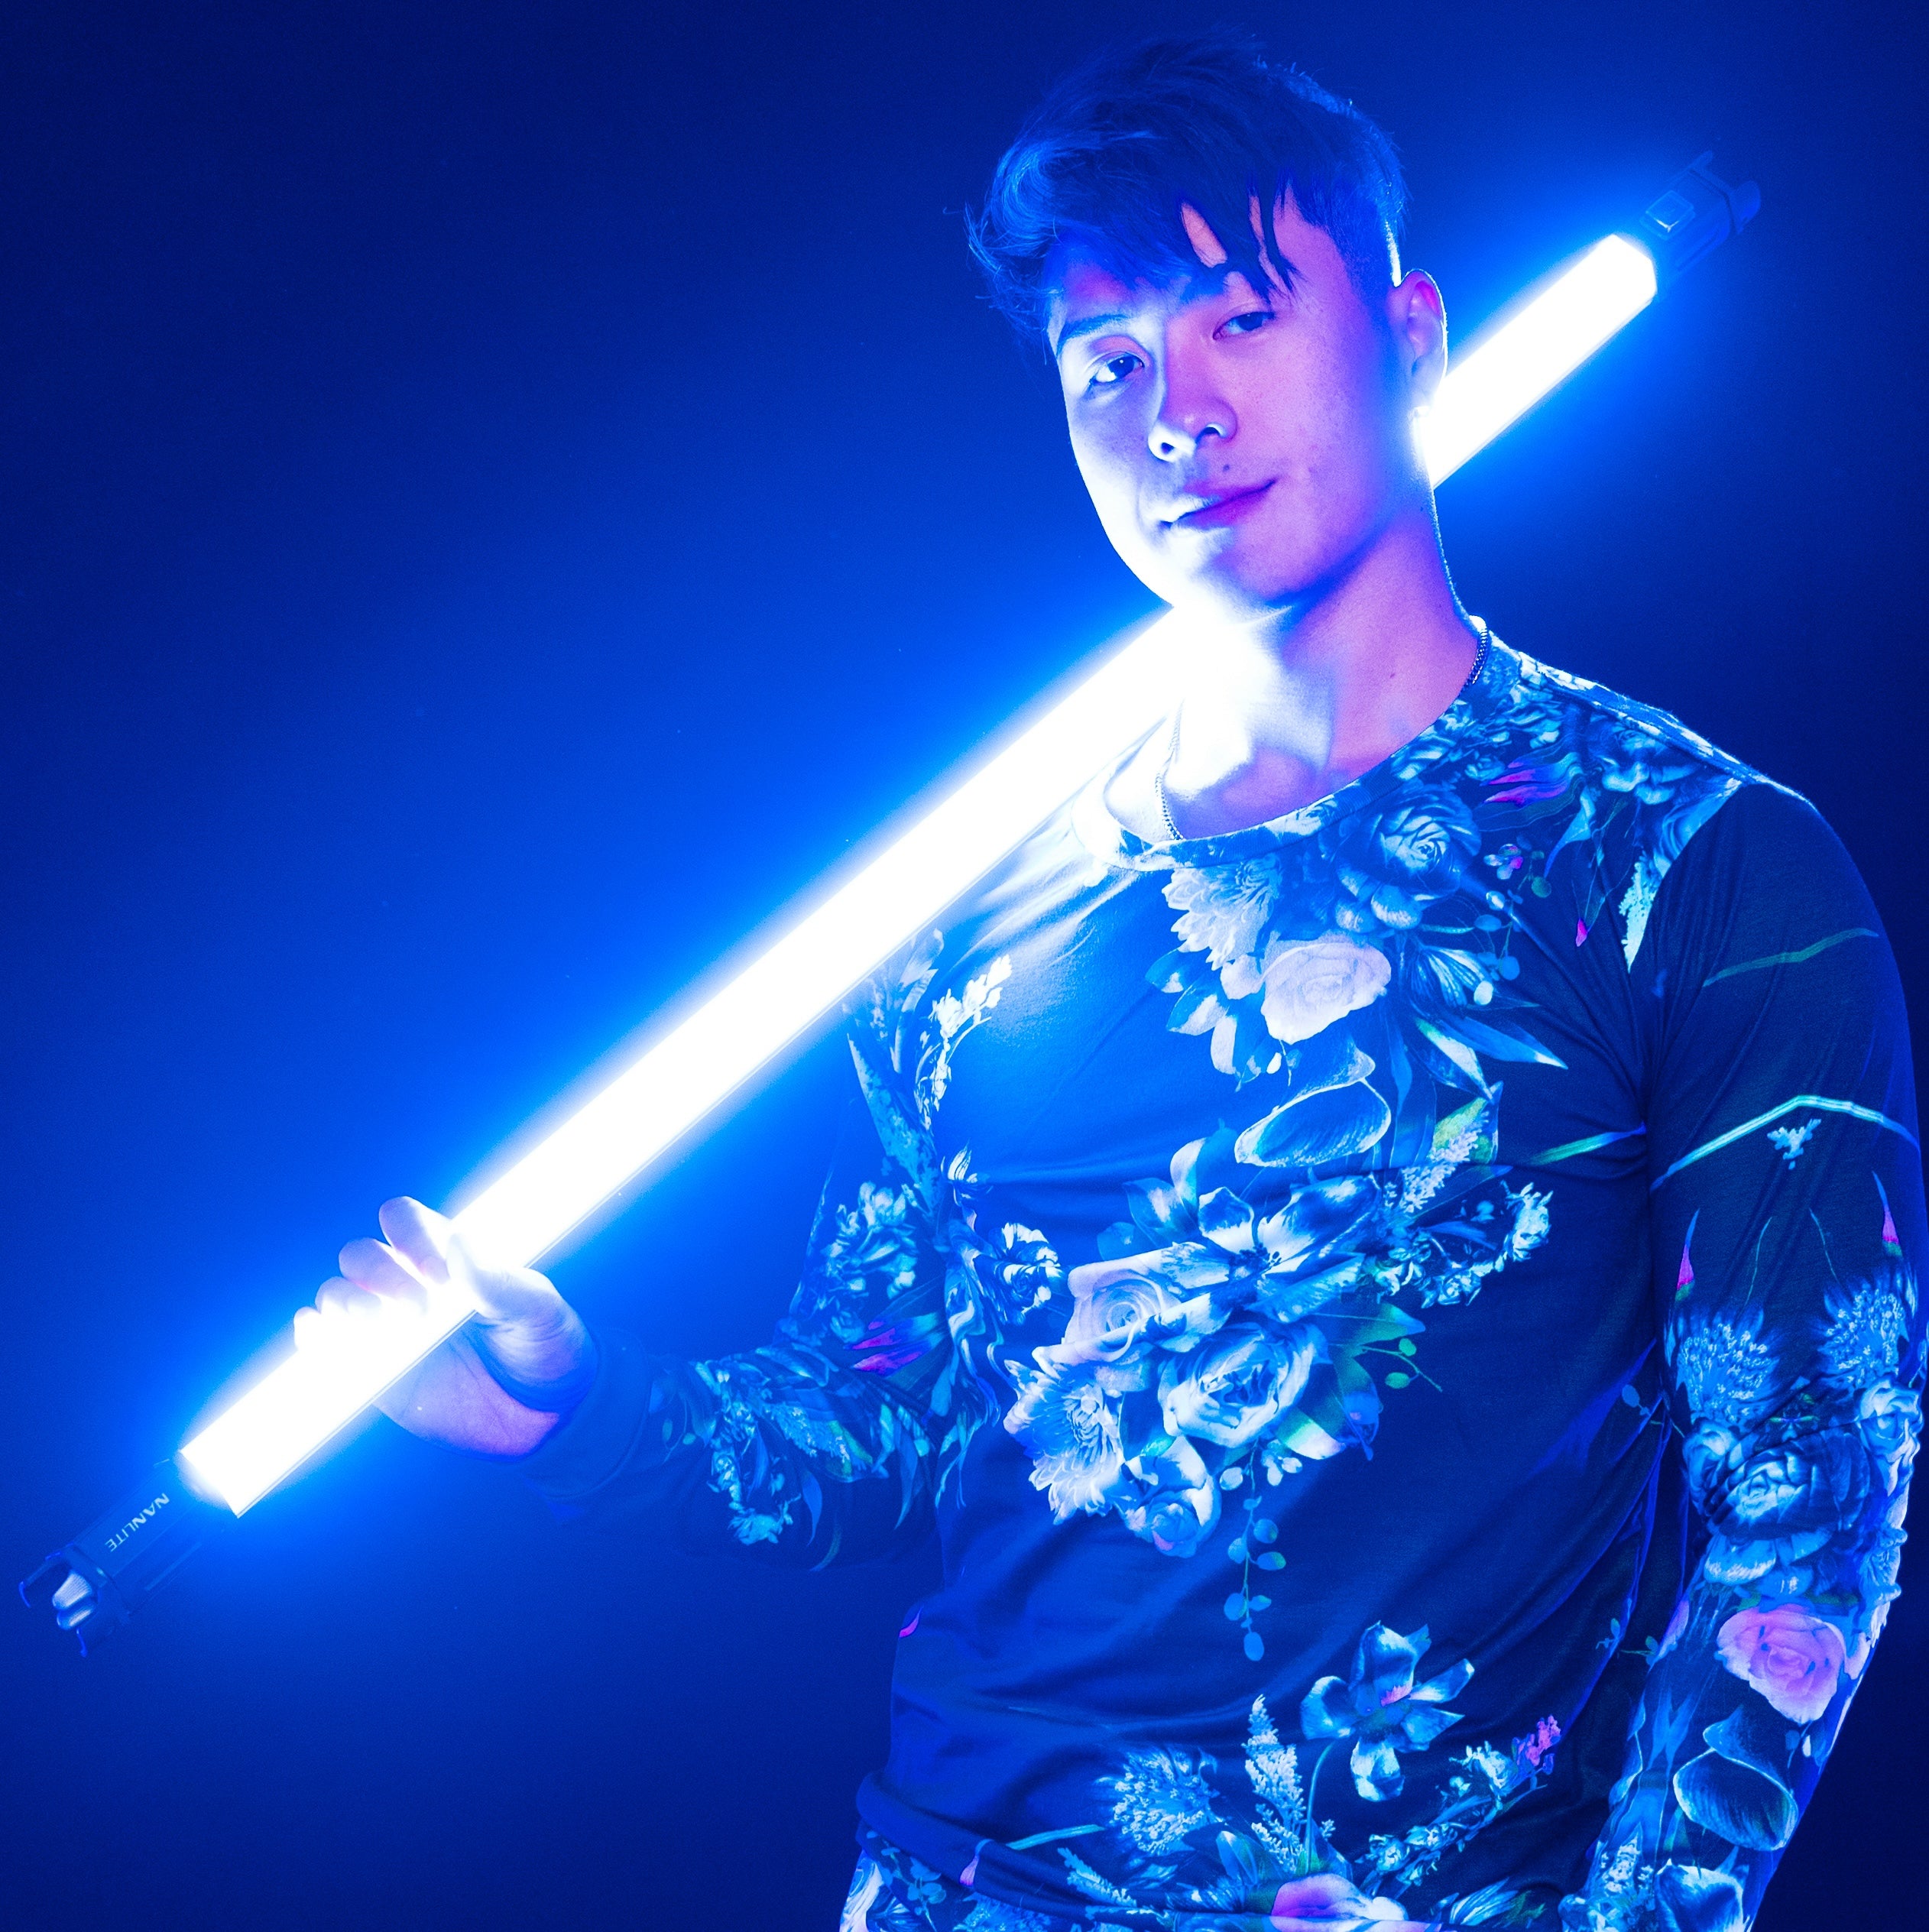 Top 10 Outfits From iEDM's Blacklight Collection